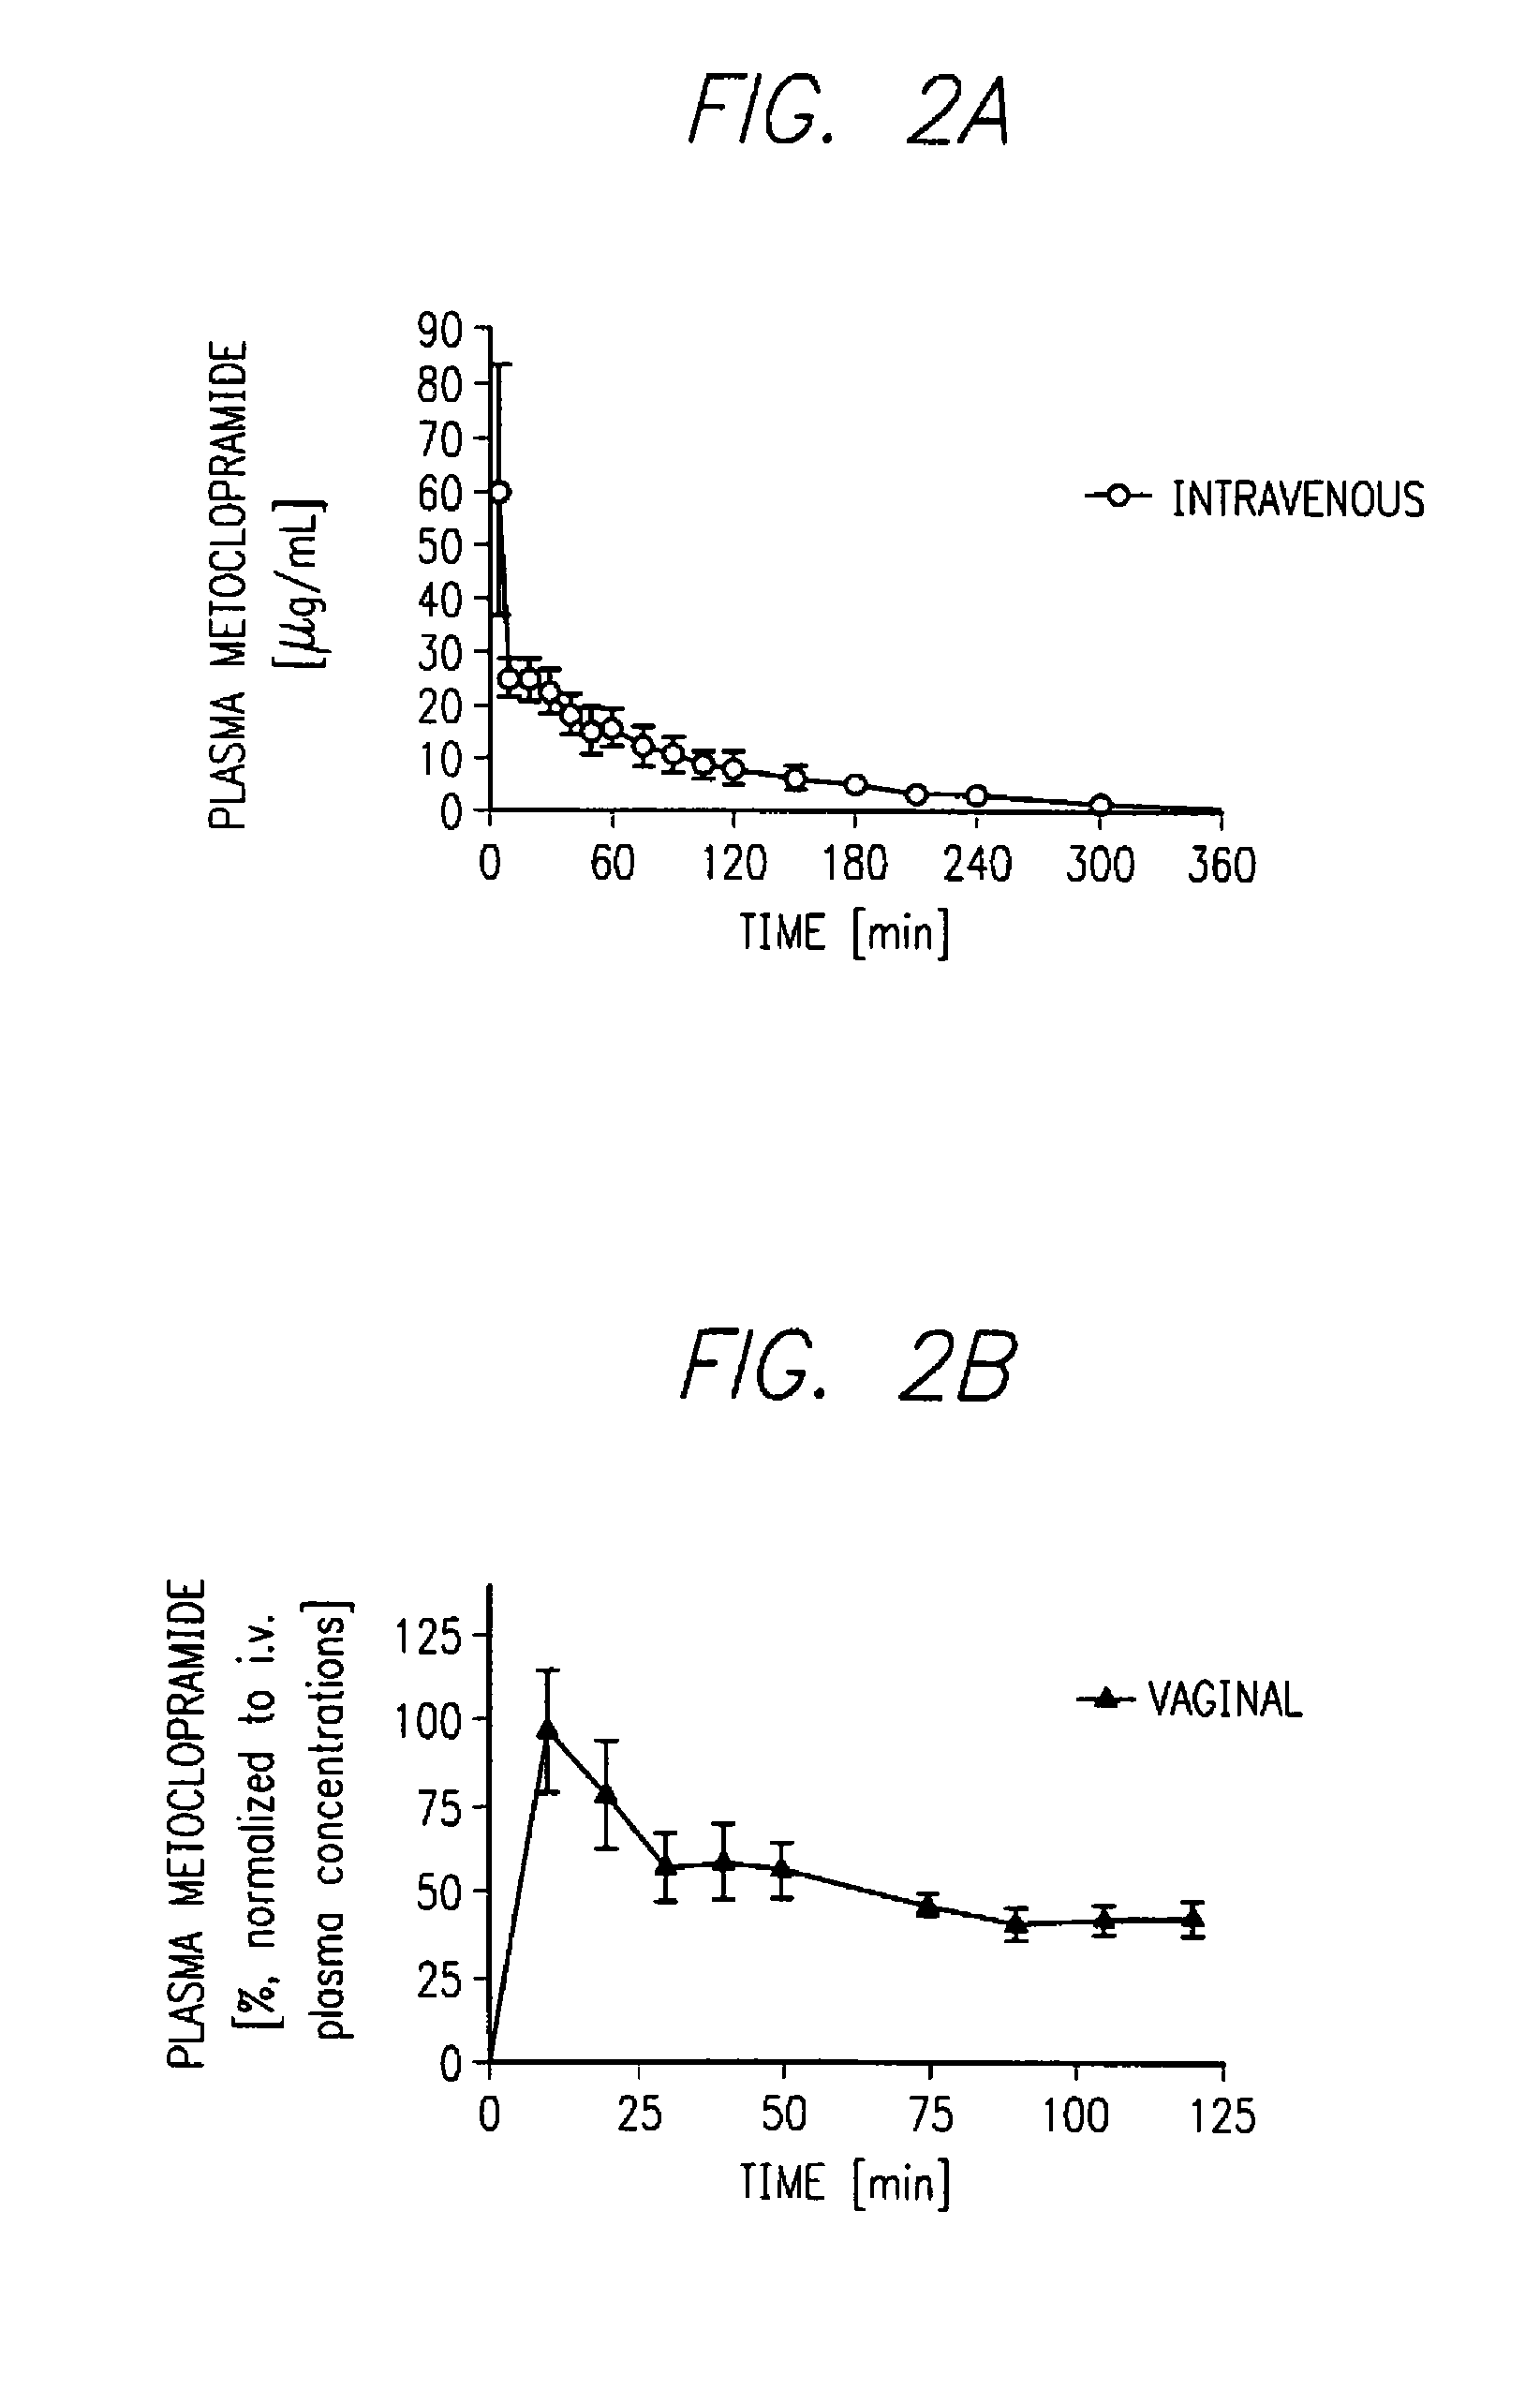 Coated vaginal device for delivery of anti-migraine and anti-nausea drugs